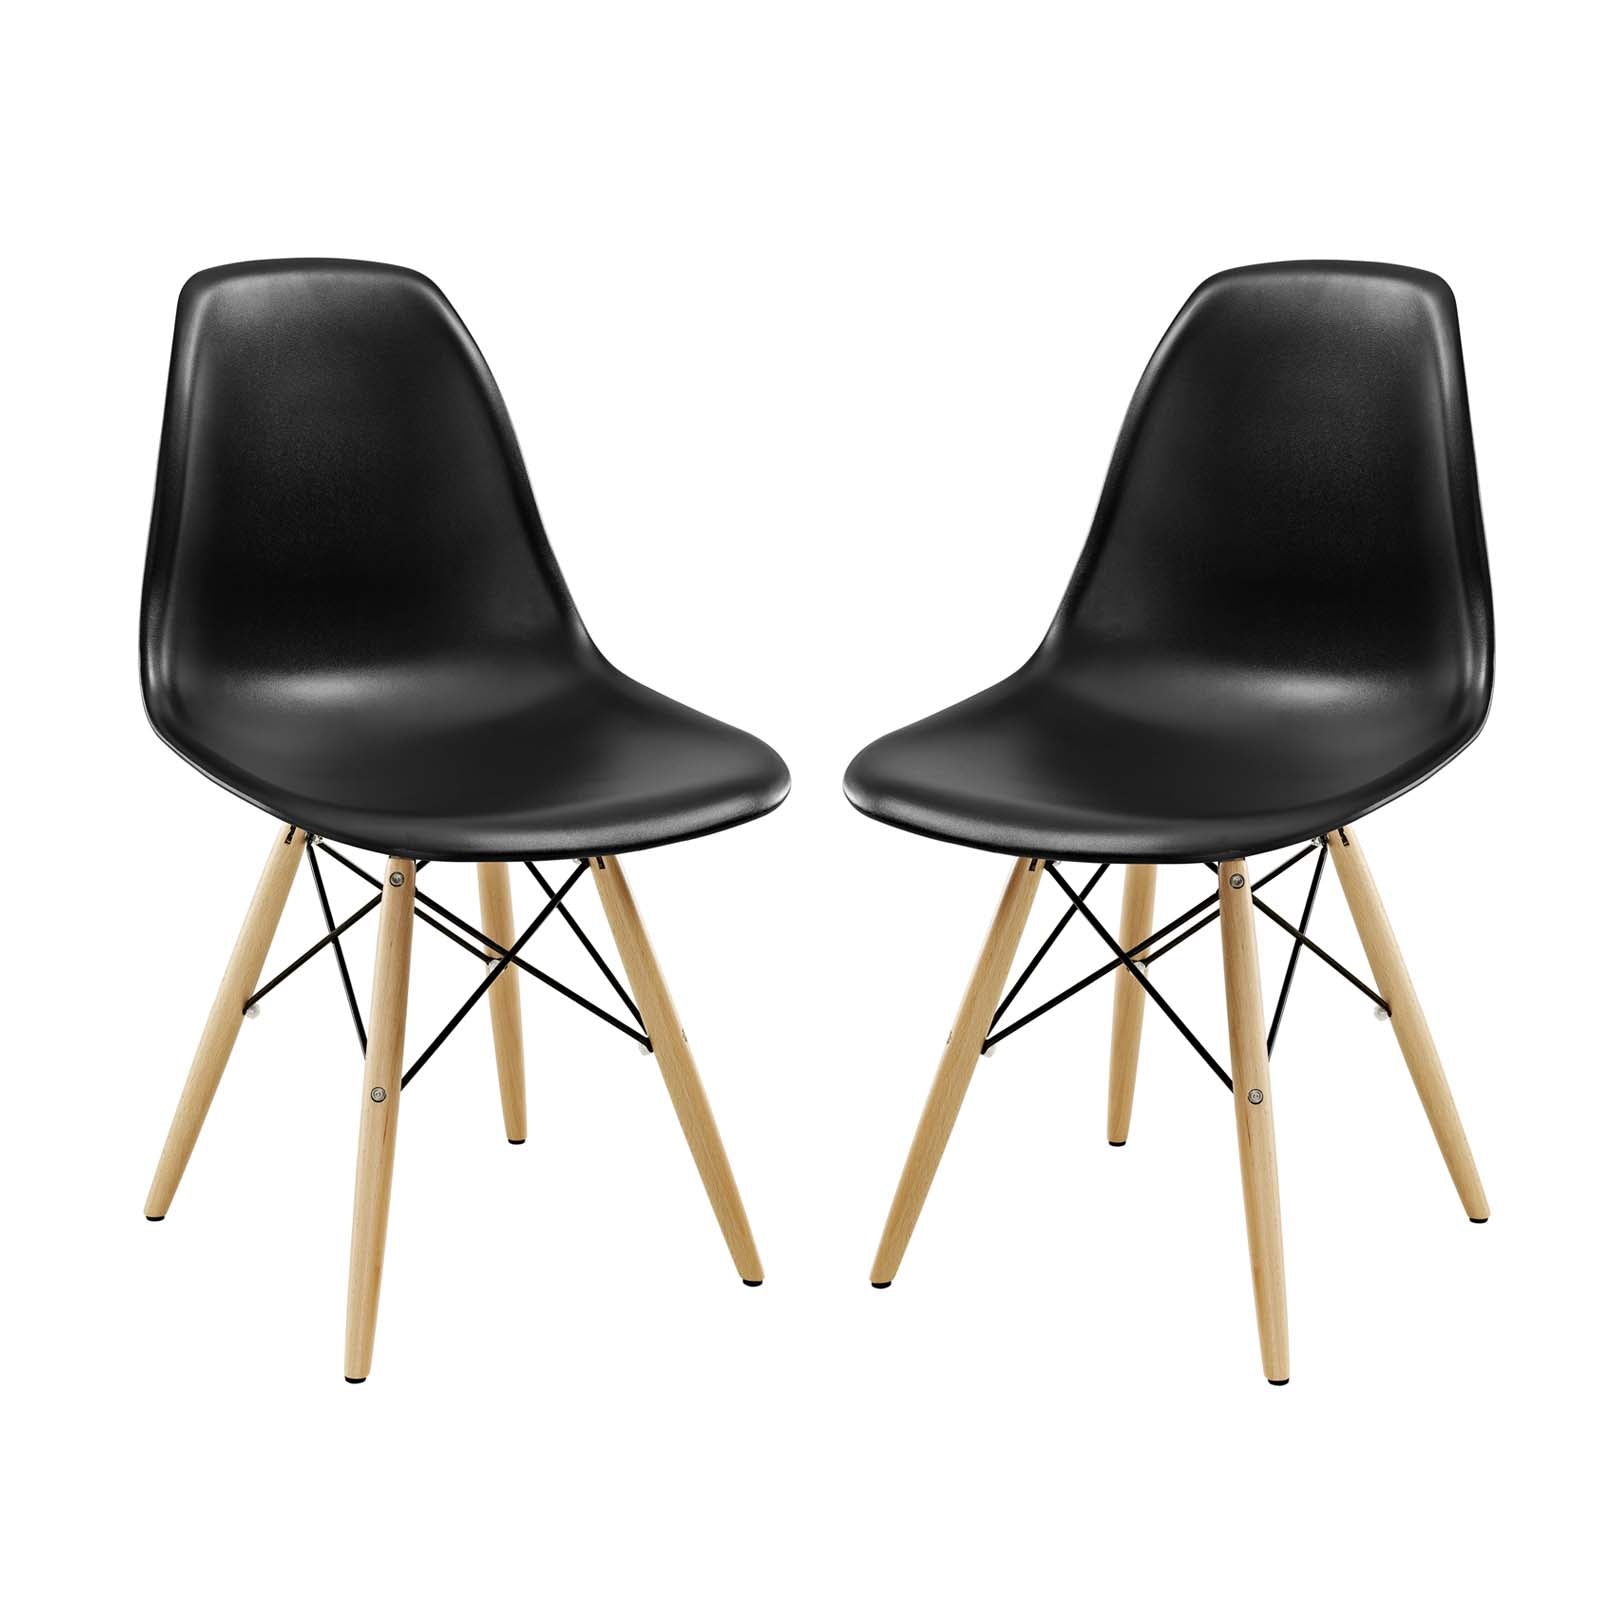 Pyramid Dining Side Chairs Set of 2 - East Shore Modern Home Furnishings